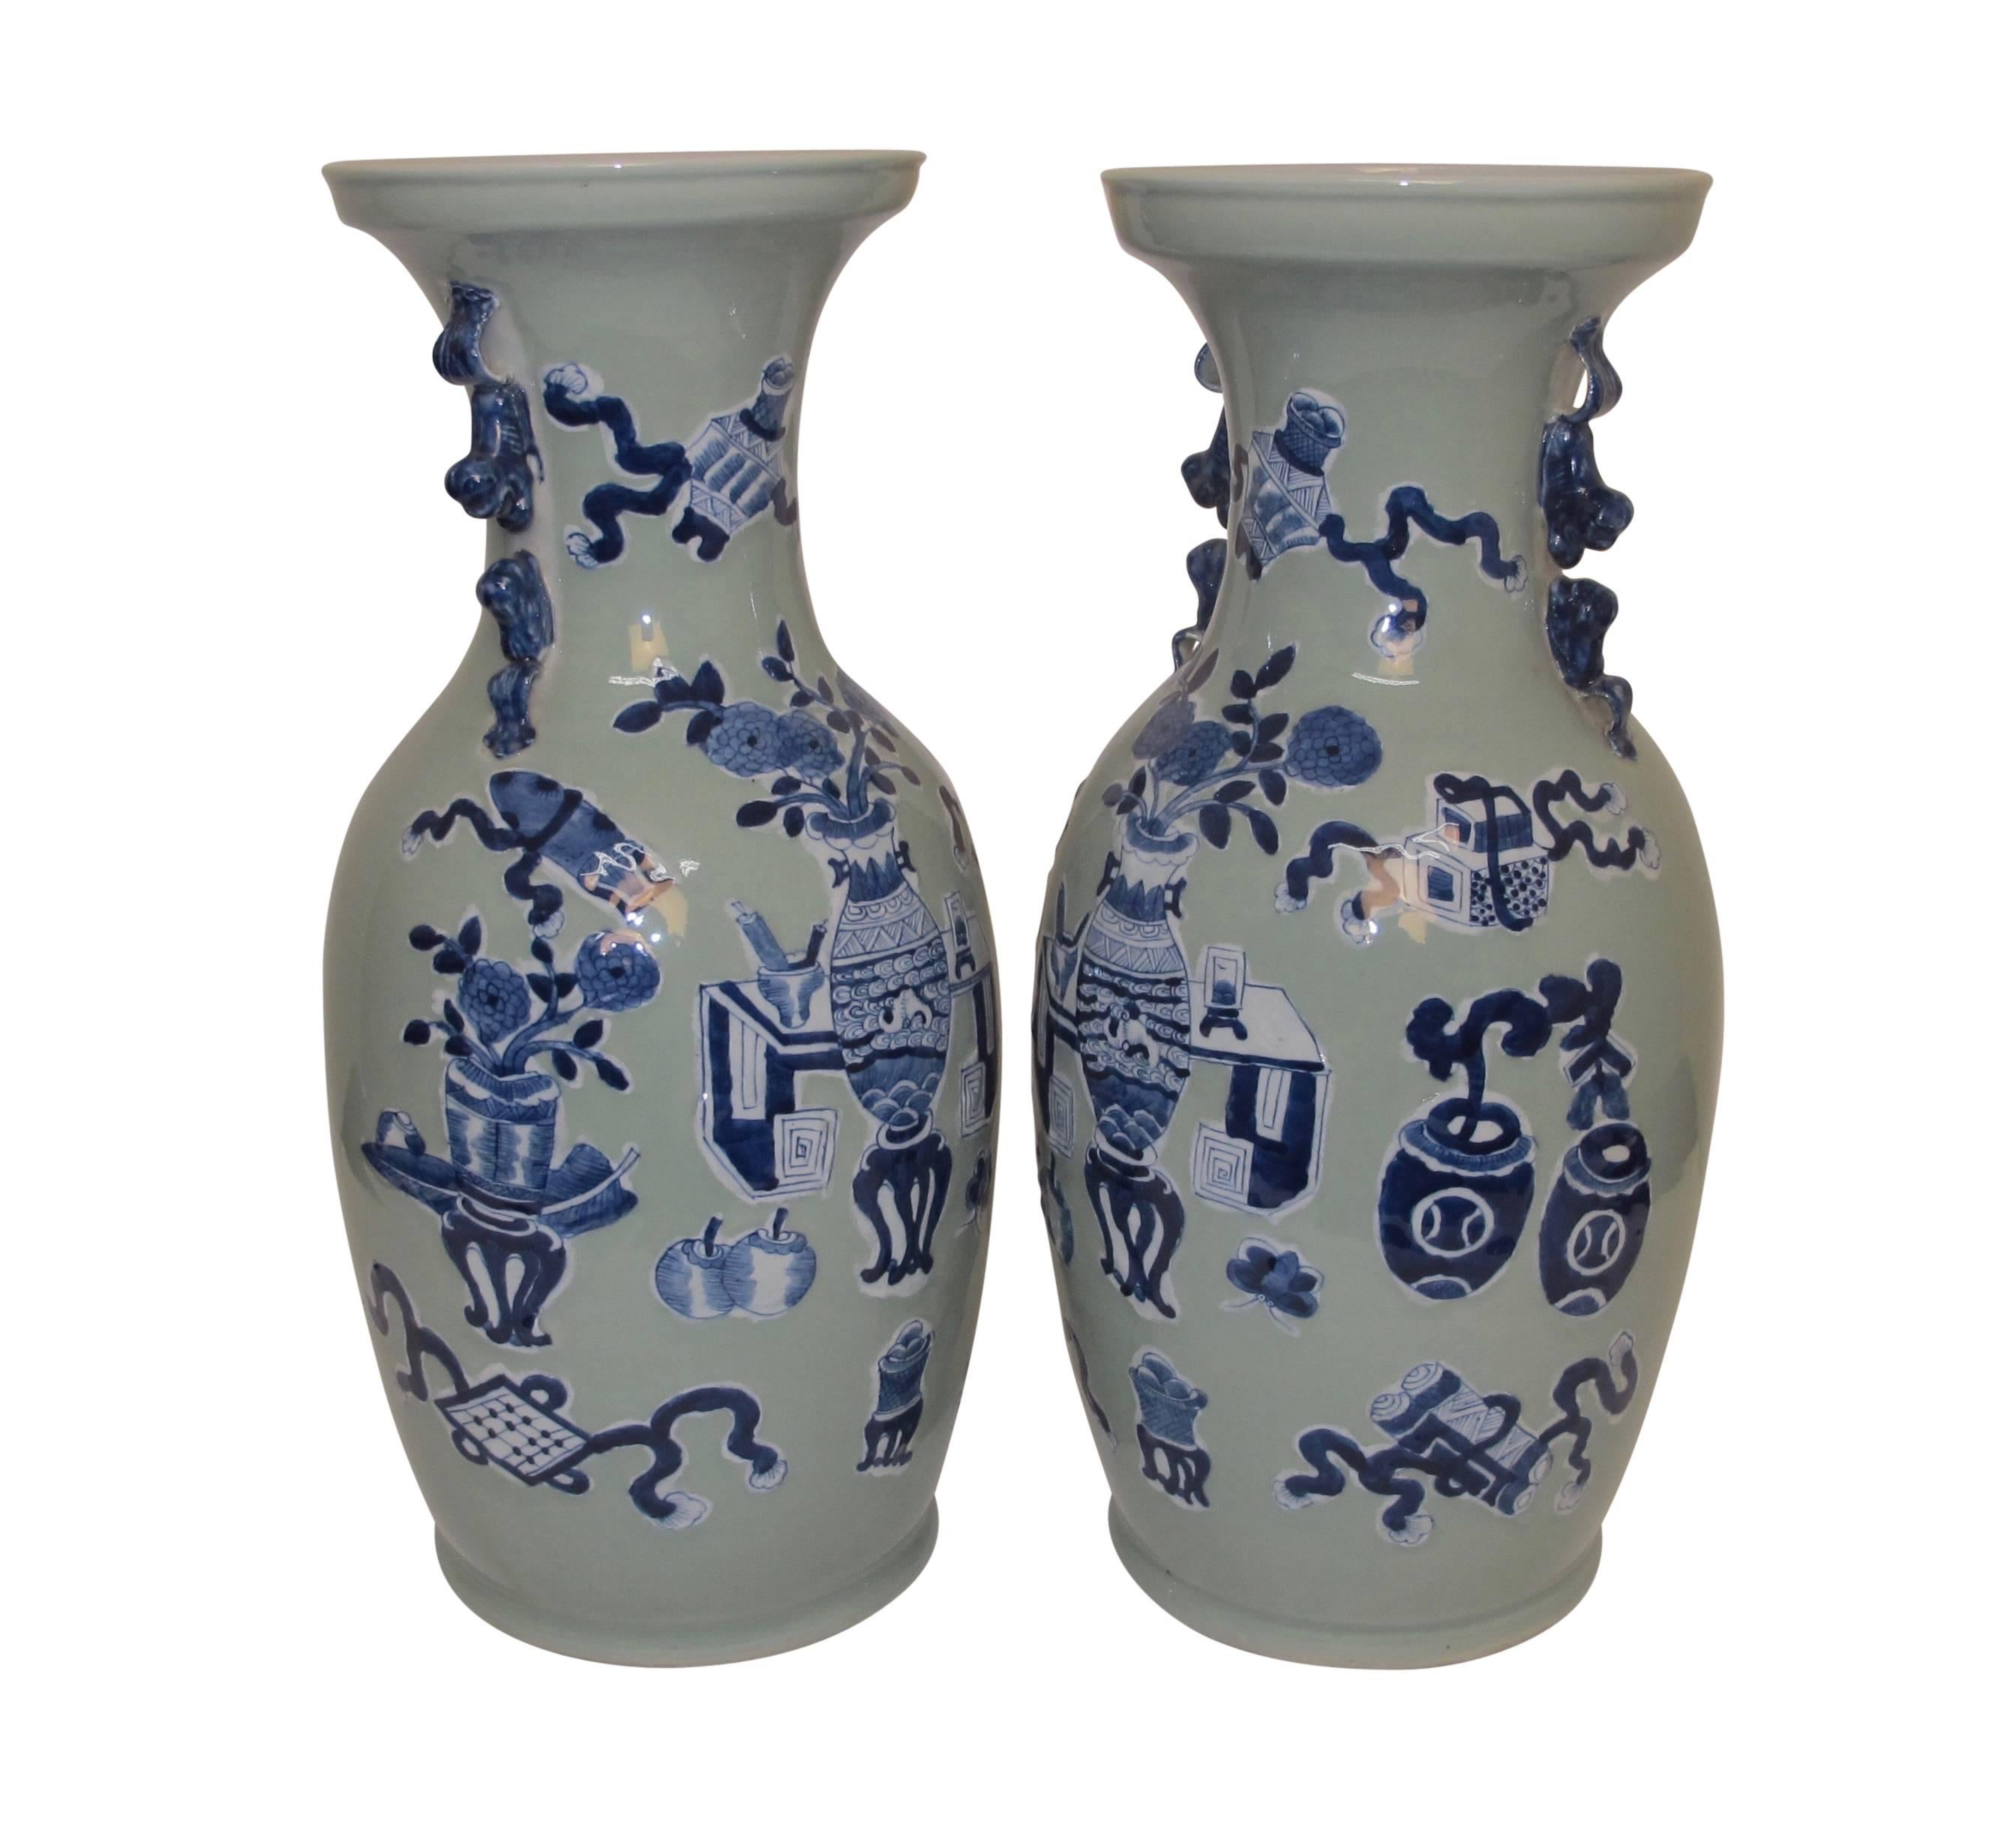 Pair of tall and handsome celadon vases with two pair of crouching lions on each side of the neck, and having various scholar symbols among vases of flowers and pots of flowering plants and fruits, Chinese, late 19th century.